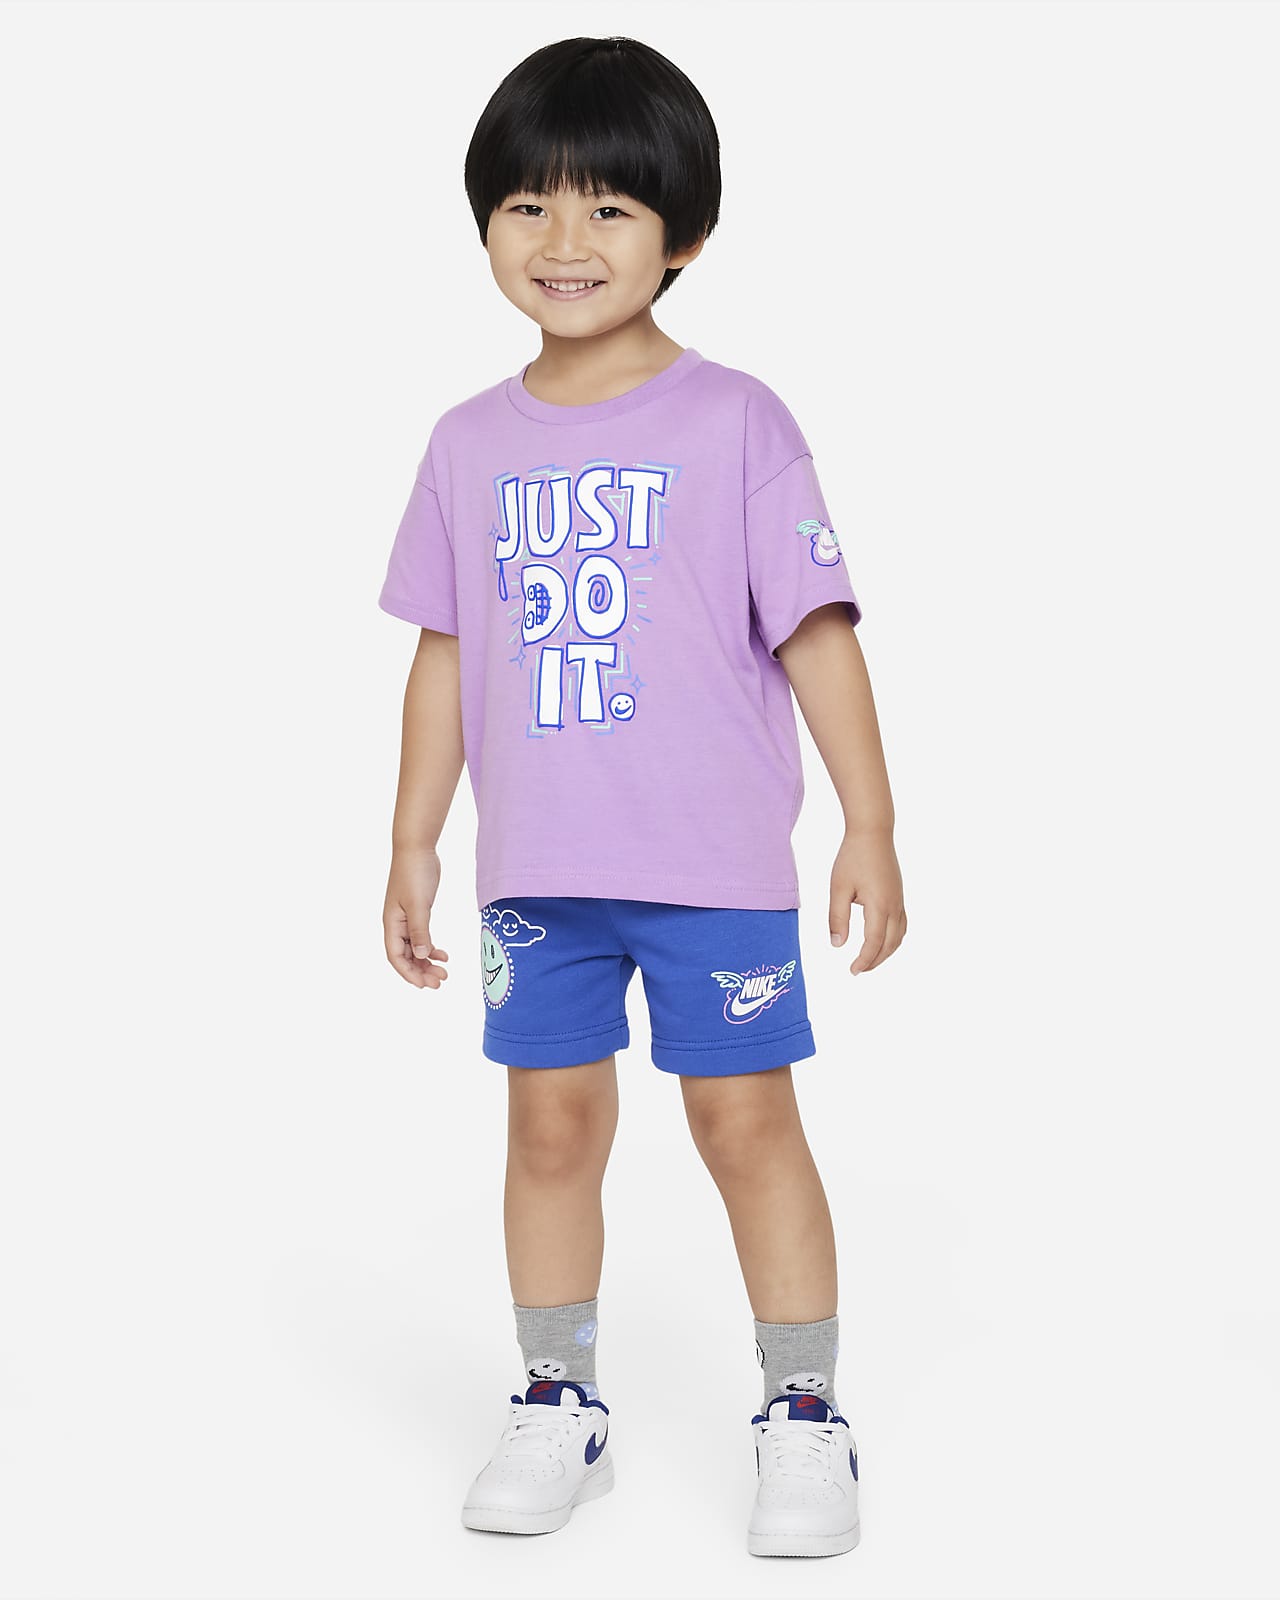 T-shirt Nike Sportswear « Art of Play » Relaxed Graphic Tee pour enfant.  Nike FR